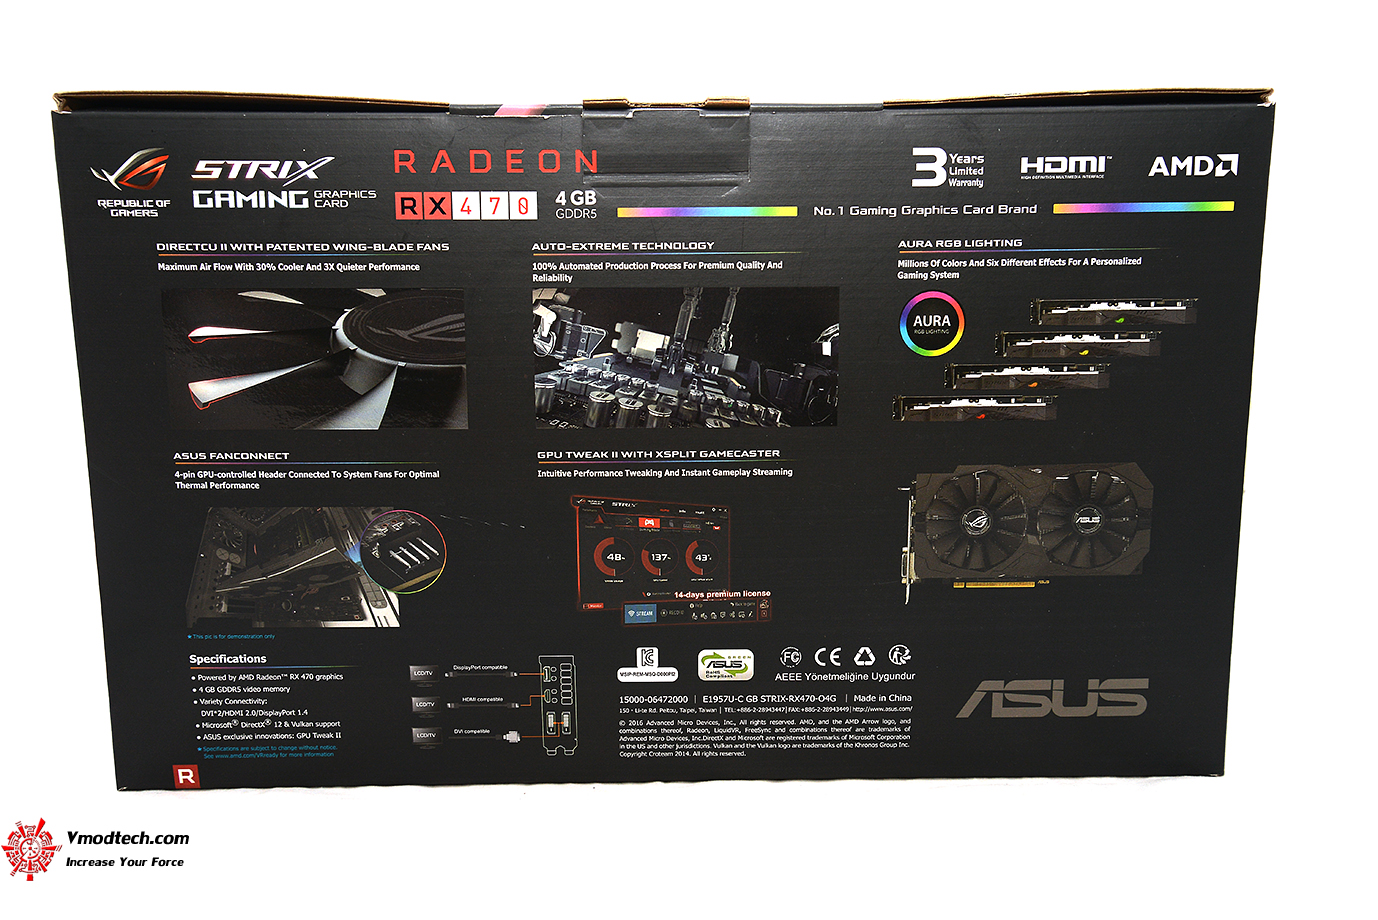 dsc 3597 ASUS ROG STRIX RX470 4G GAMING REVIEW